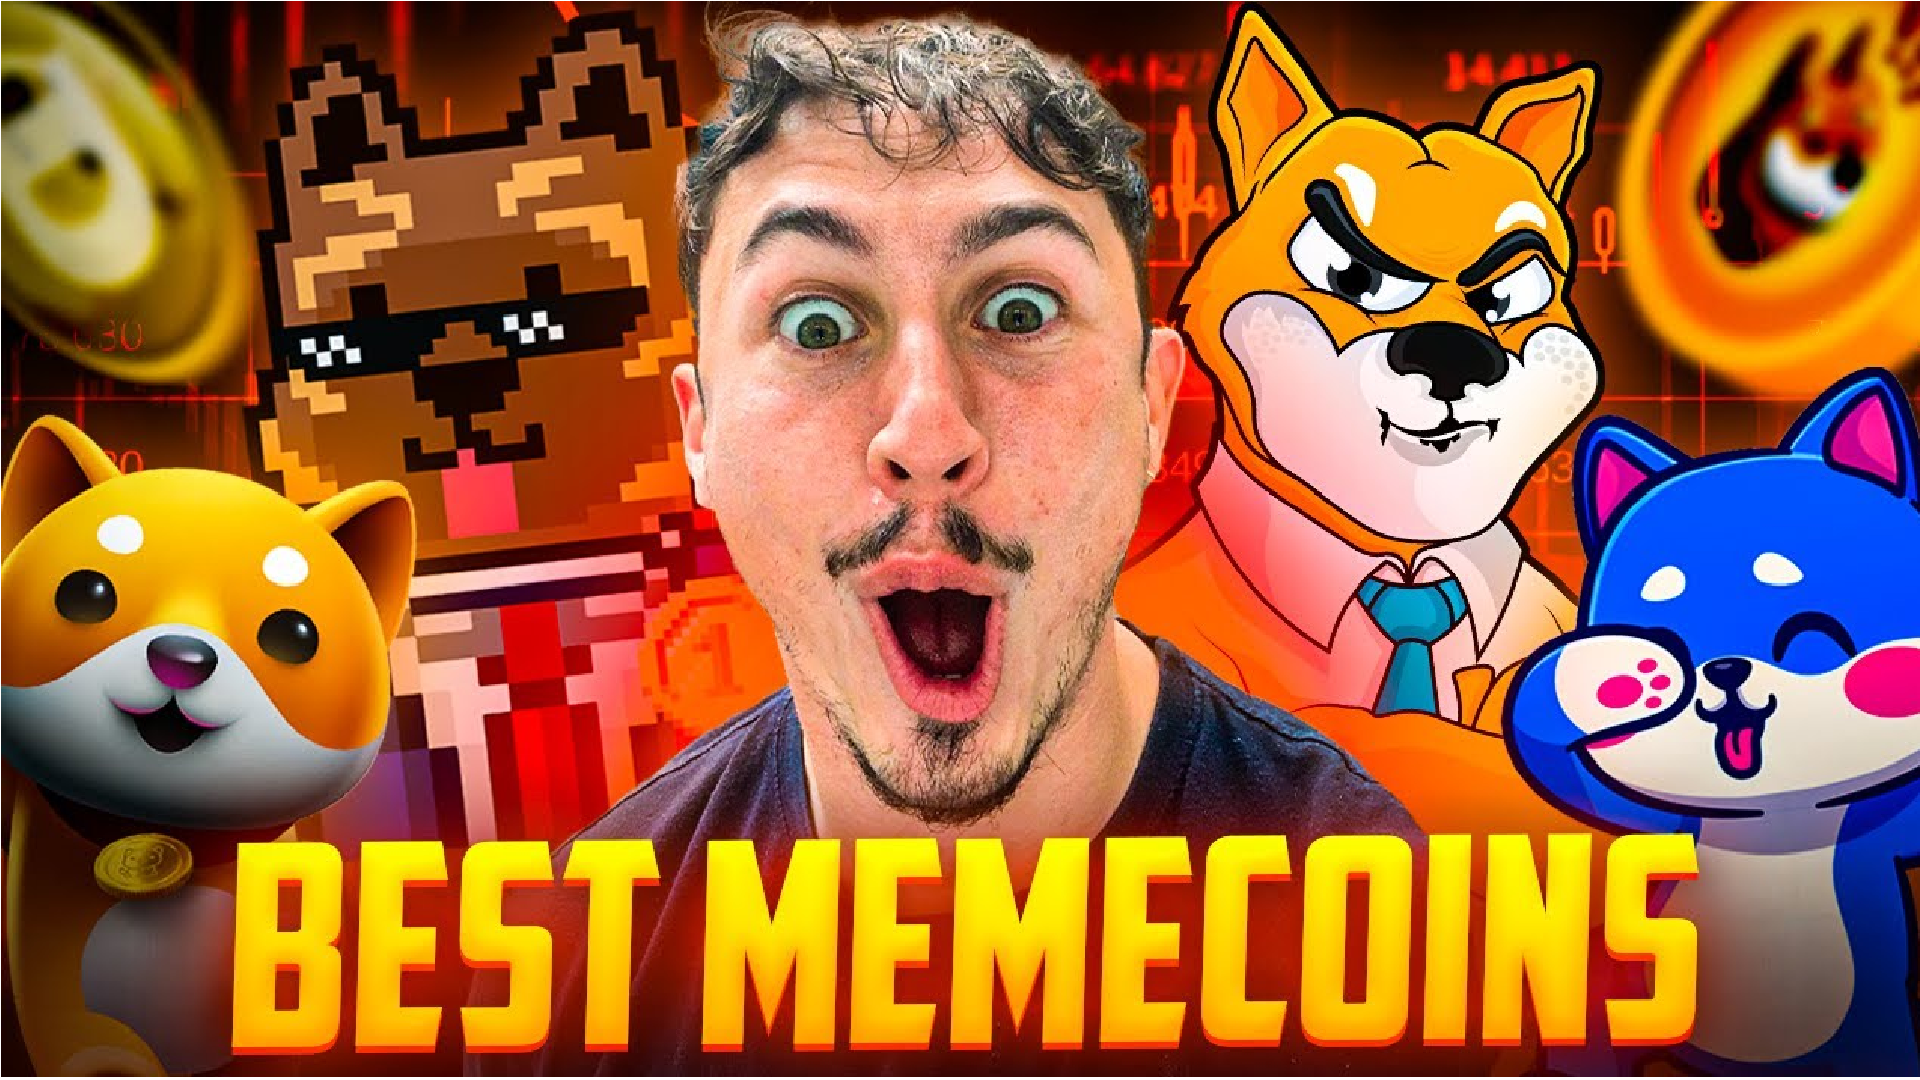 The Five Best Memecoins Set to Explode in 2023